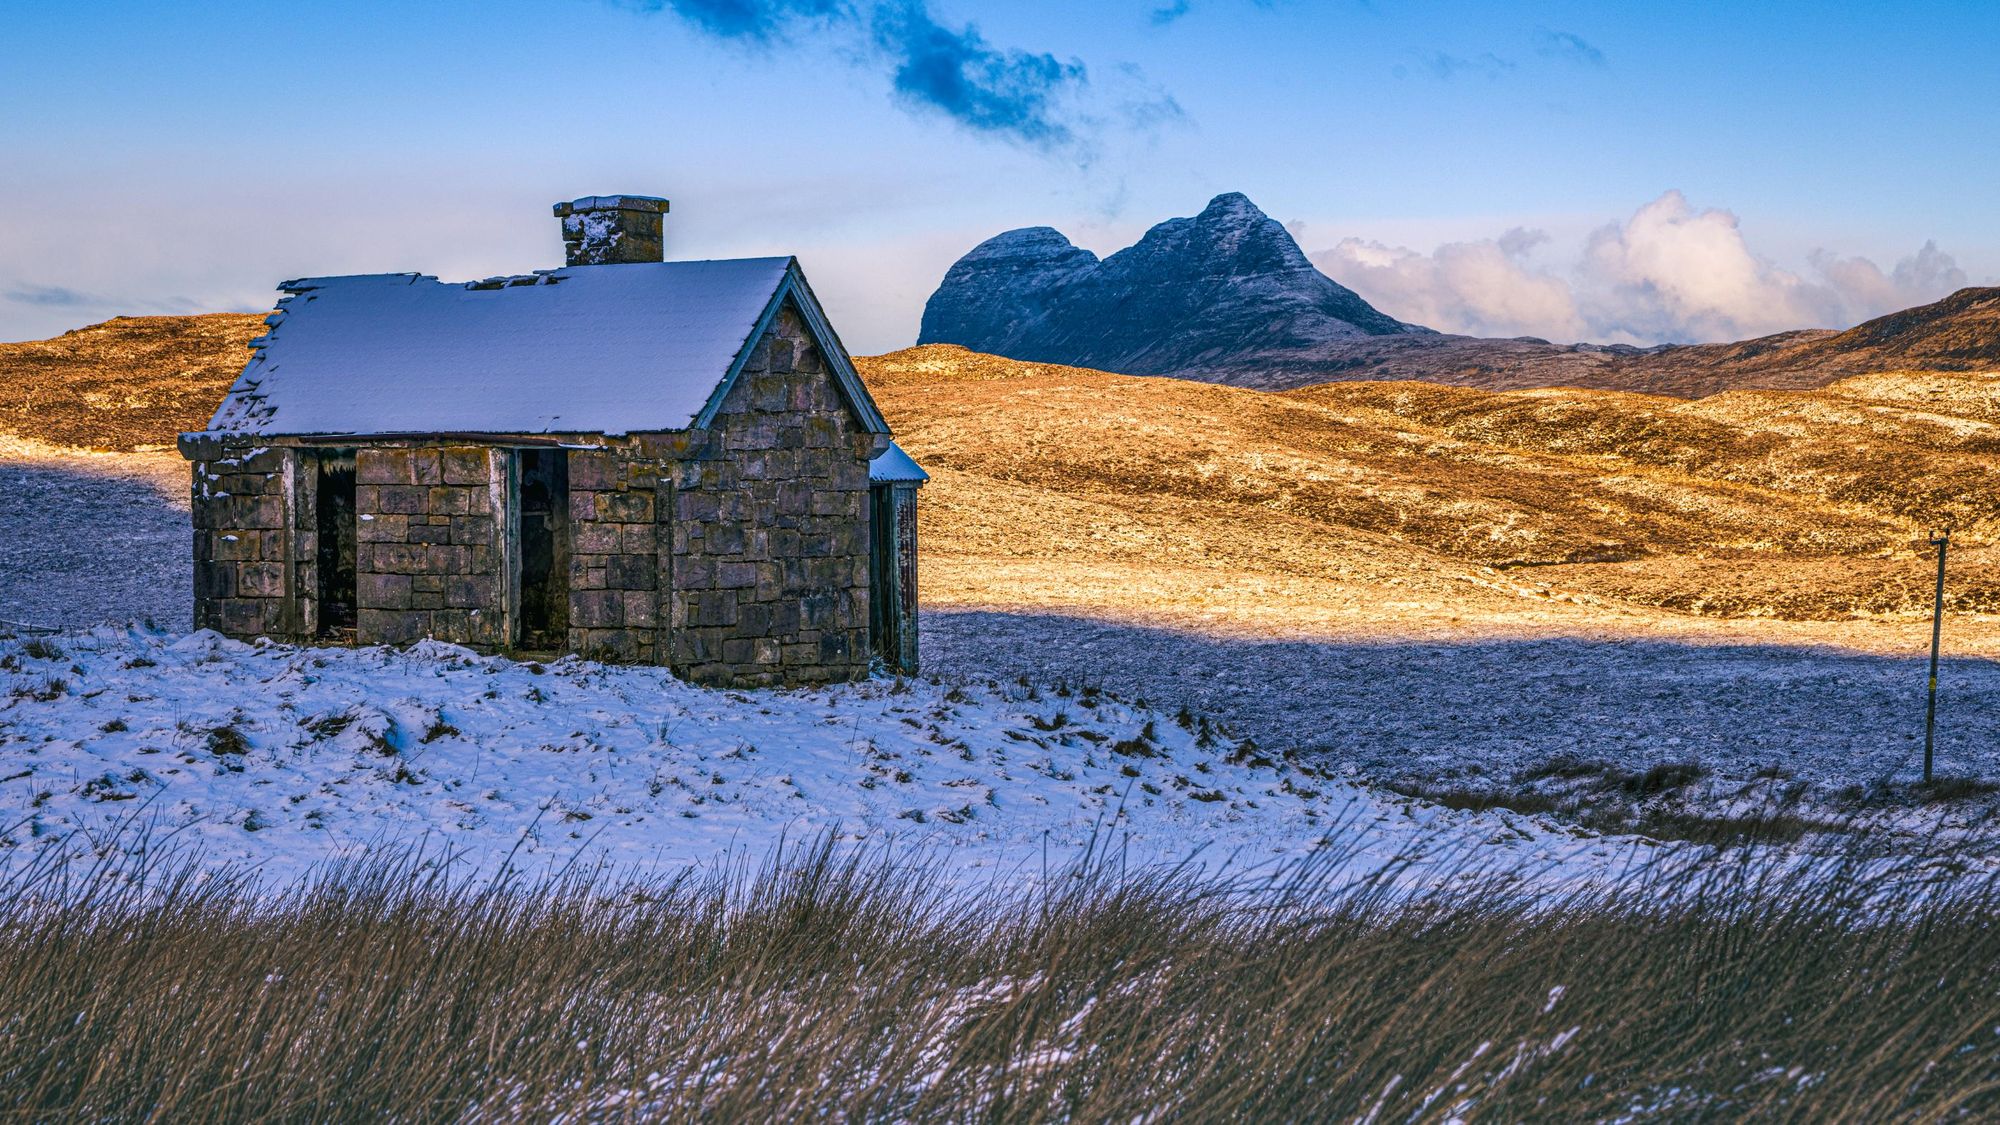 The Elphin bothy in Assynt, Scotland with the mountain Suilven also in the picture. Photo: Getty